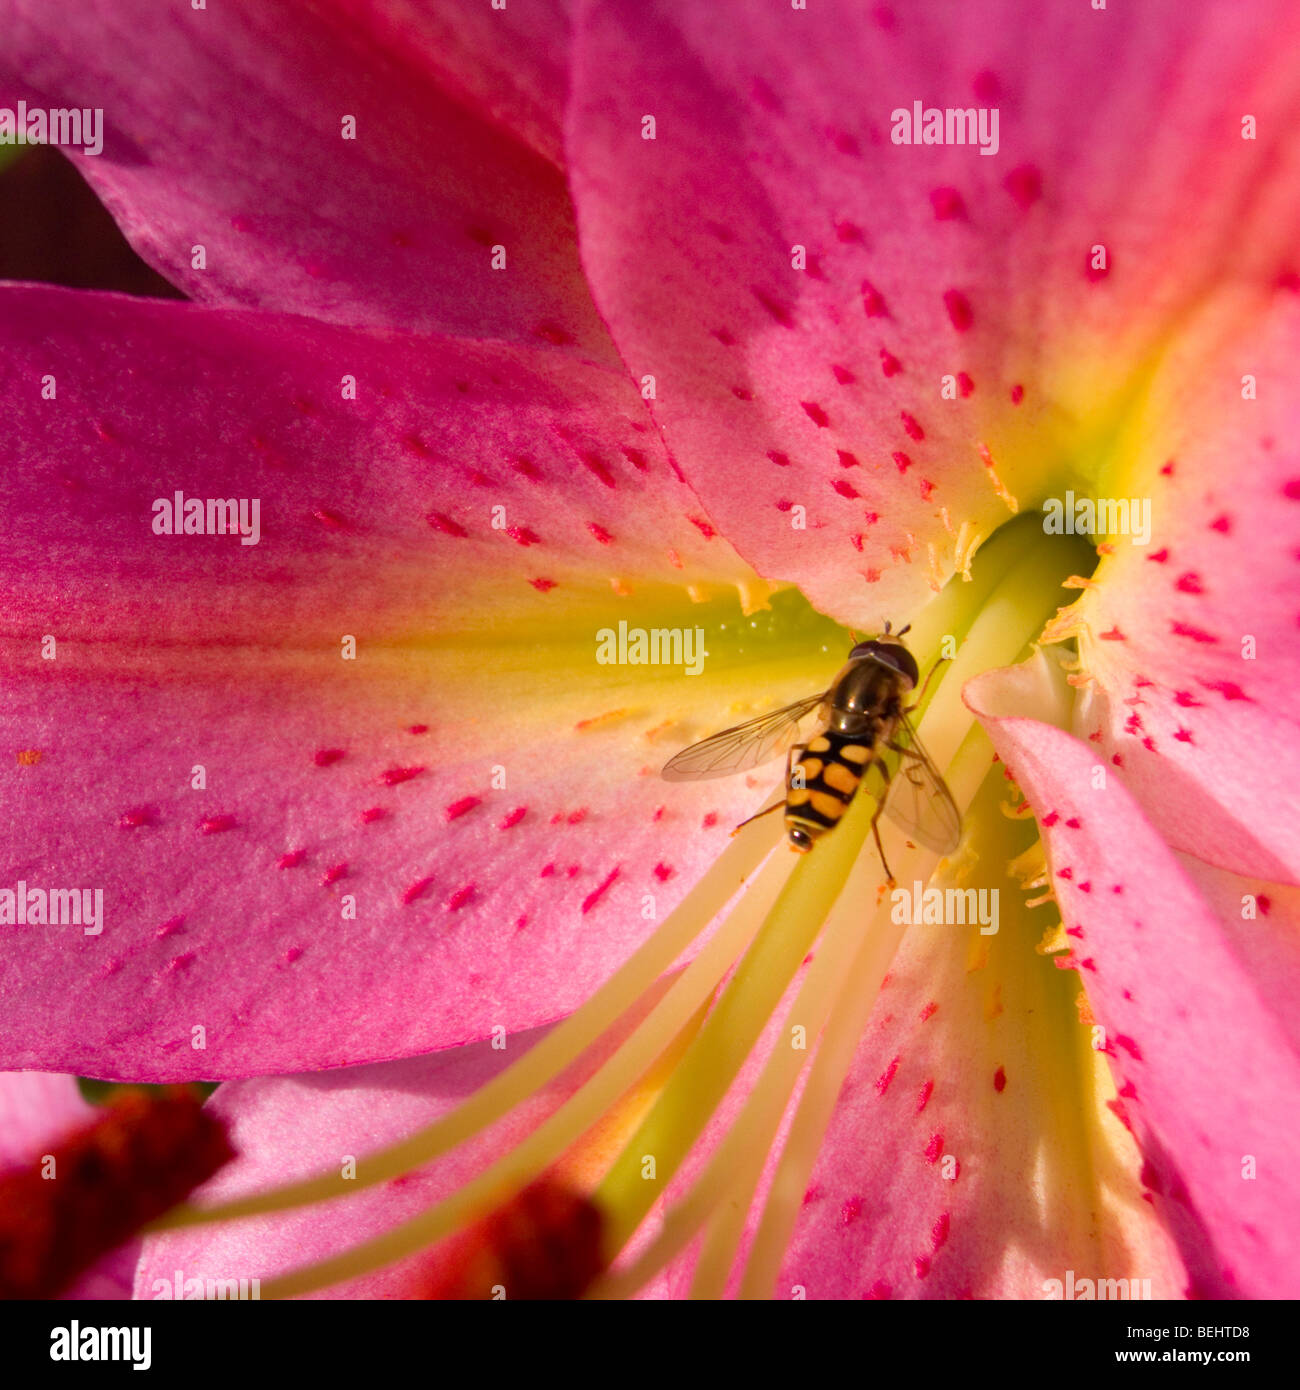 Hoverfly on a lily flower Stock Photo